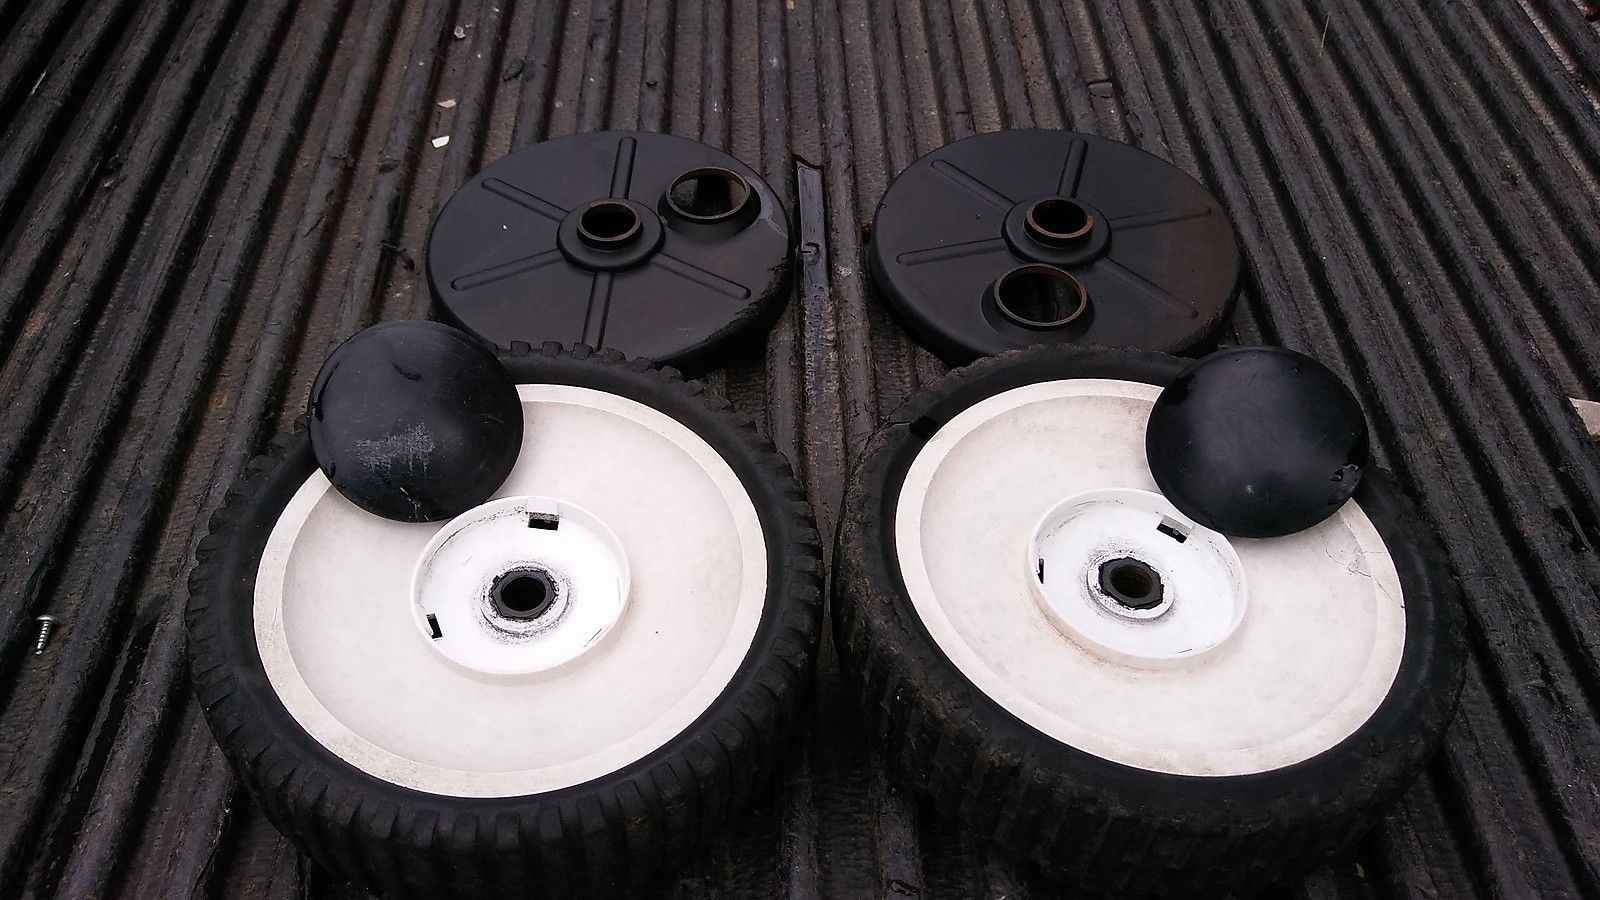 Primary image for 7PP47 PAIR OF FRONT DRIVE WHEELS FROM CRAFTSMAN 917.375735 MOWER: 7-1/2" DIAM